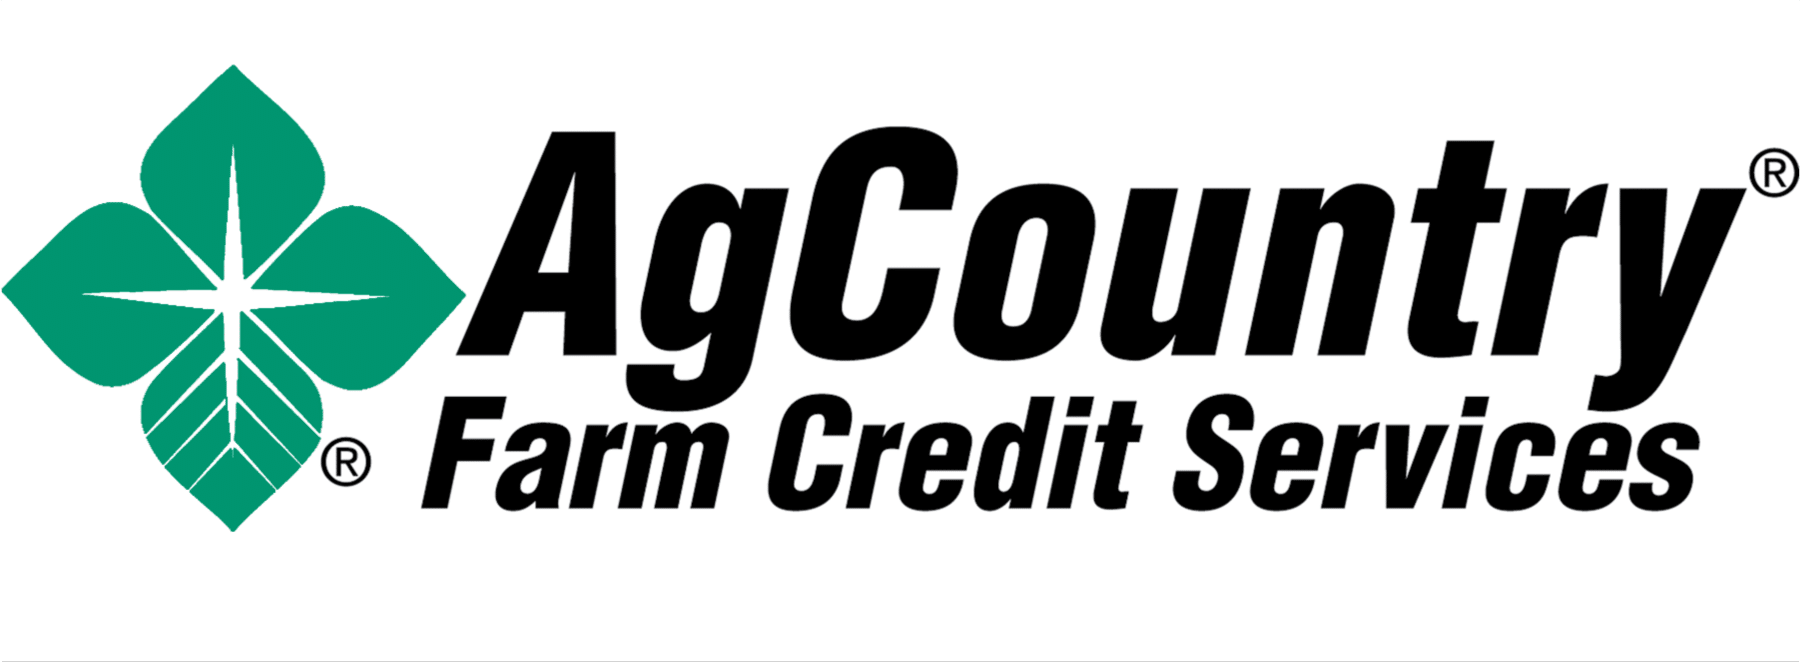 Ag country farm credit services logo.